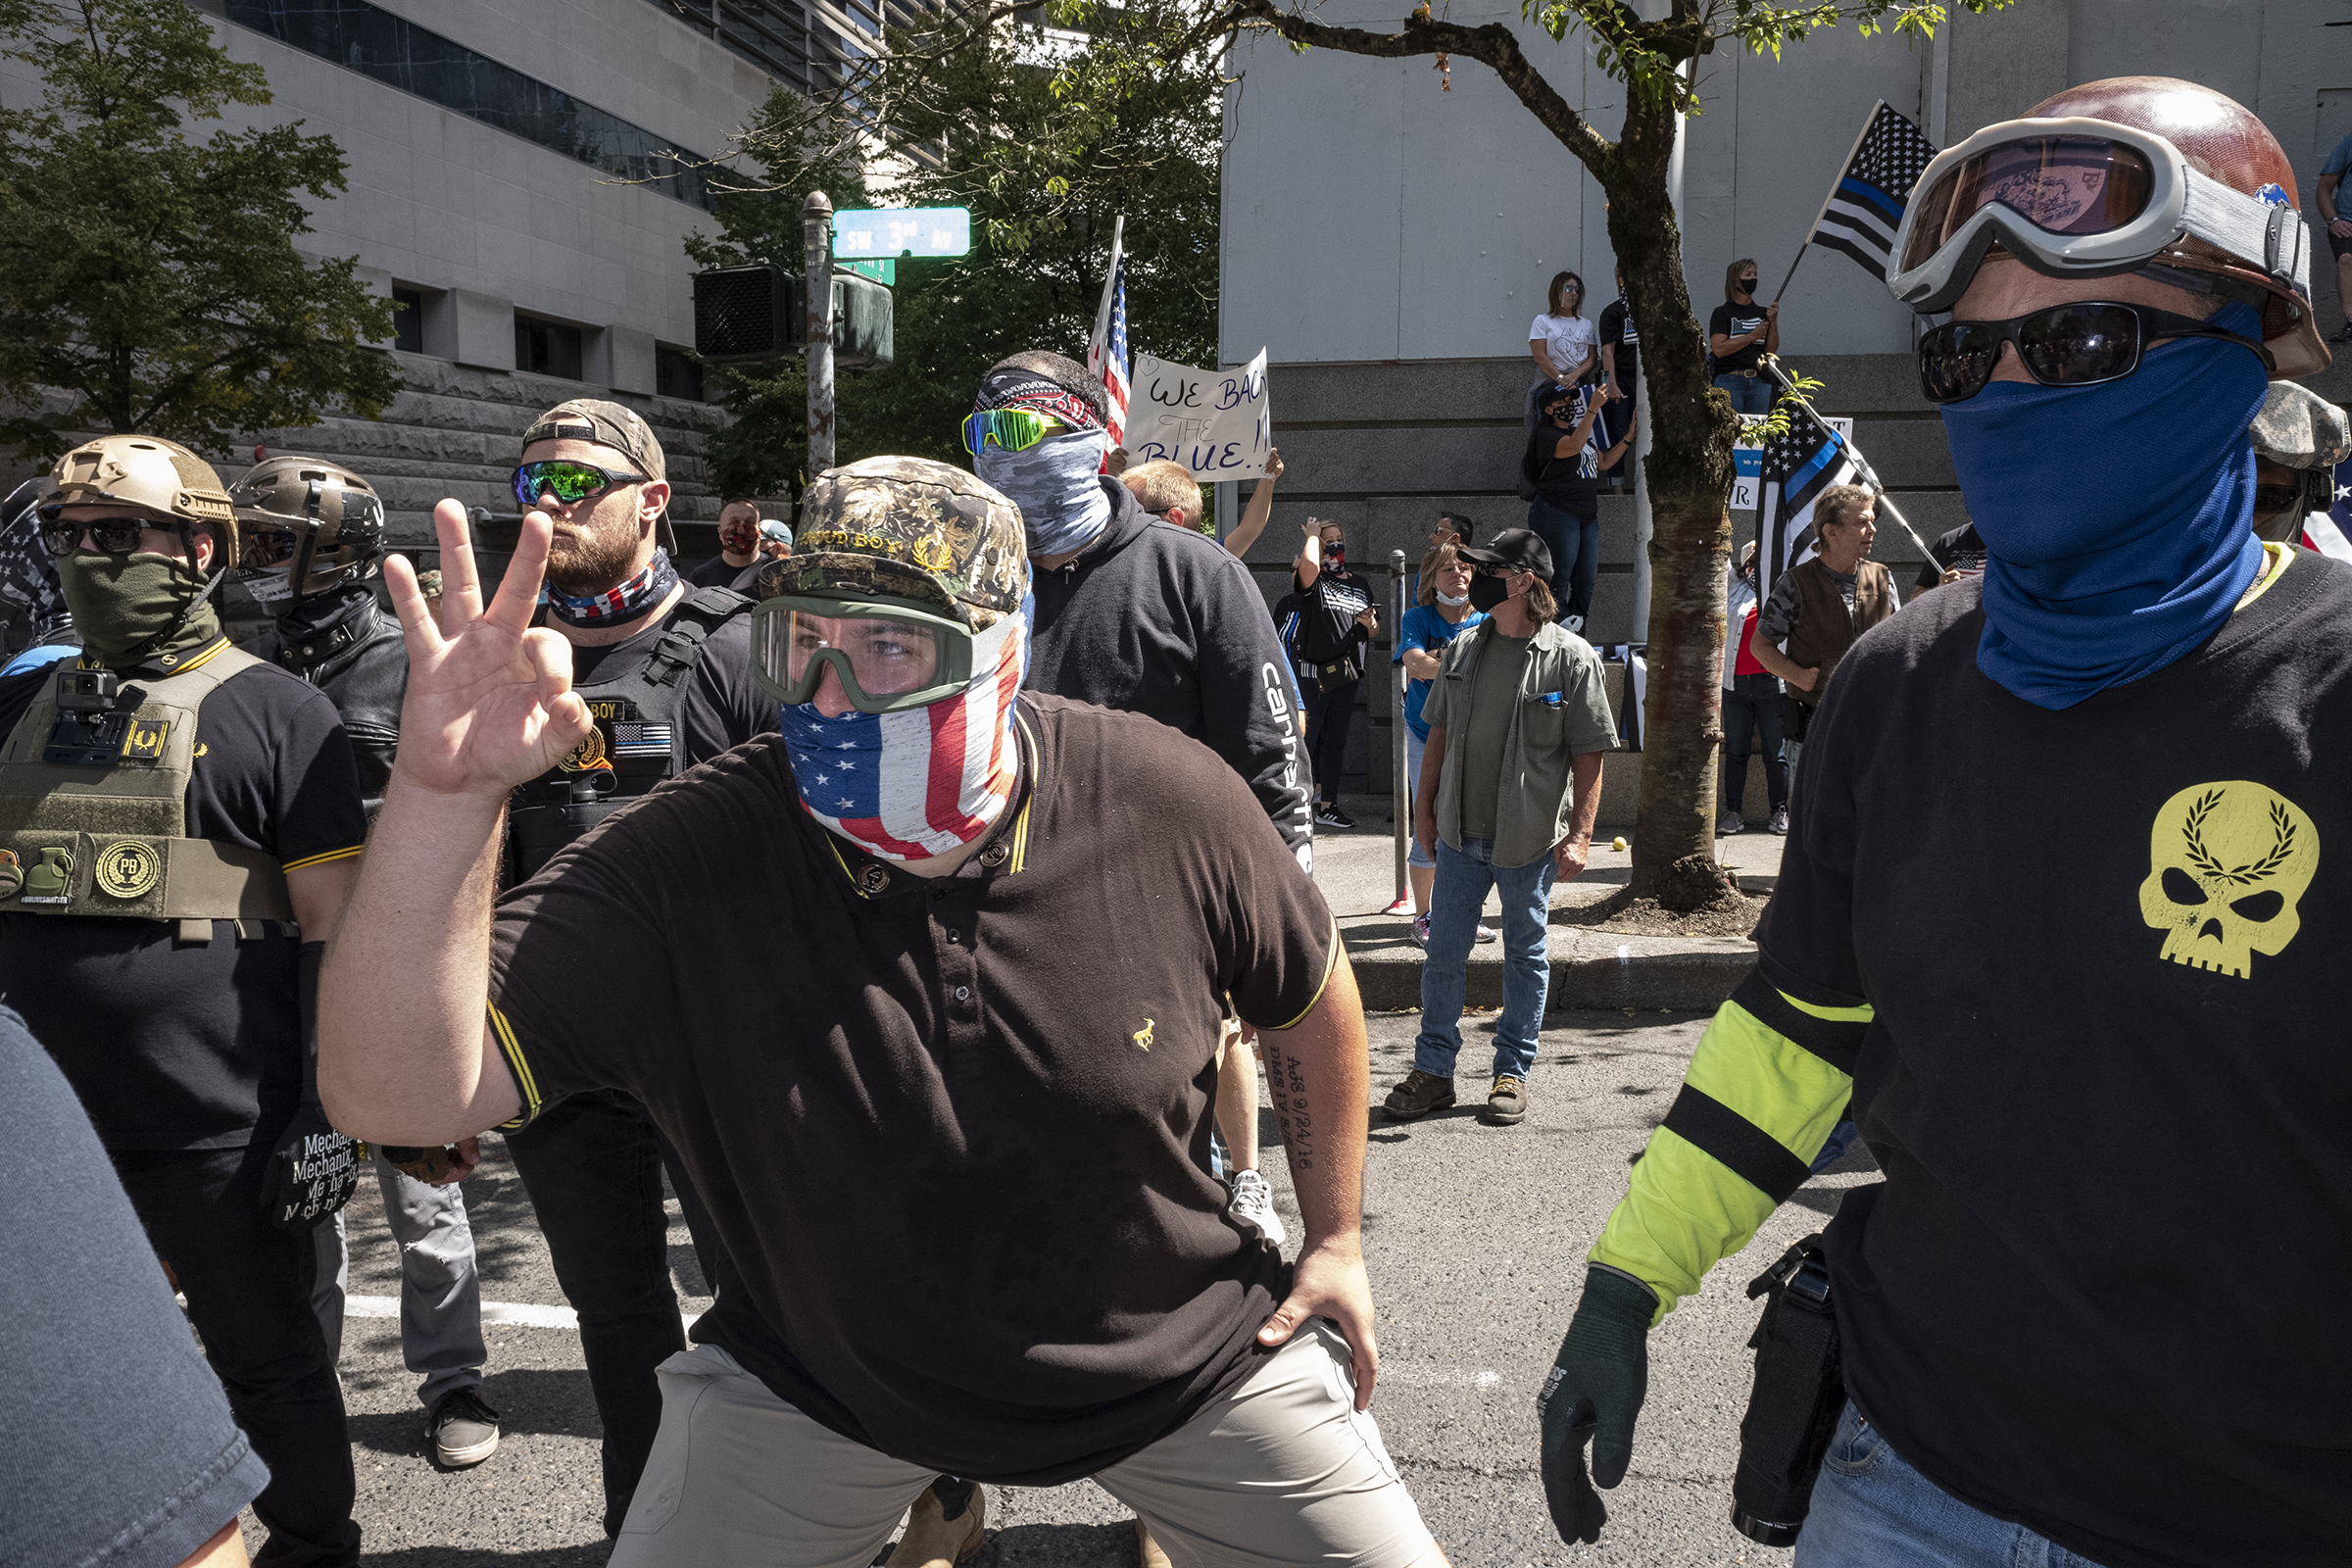 An associate of the Proud Boys, a far-right group with a history of engaging in violent street clashes, flashes the once innocuous “OK” hand sign—now co-opted by white supremacists—at counter demonstrators during a rally in Portland, Ore., Aug. 22, 2020. (Rian Dundon)